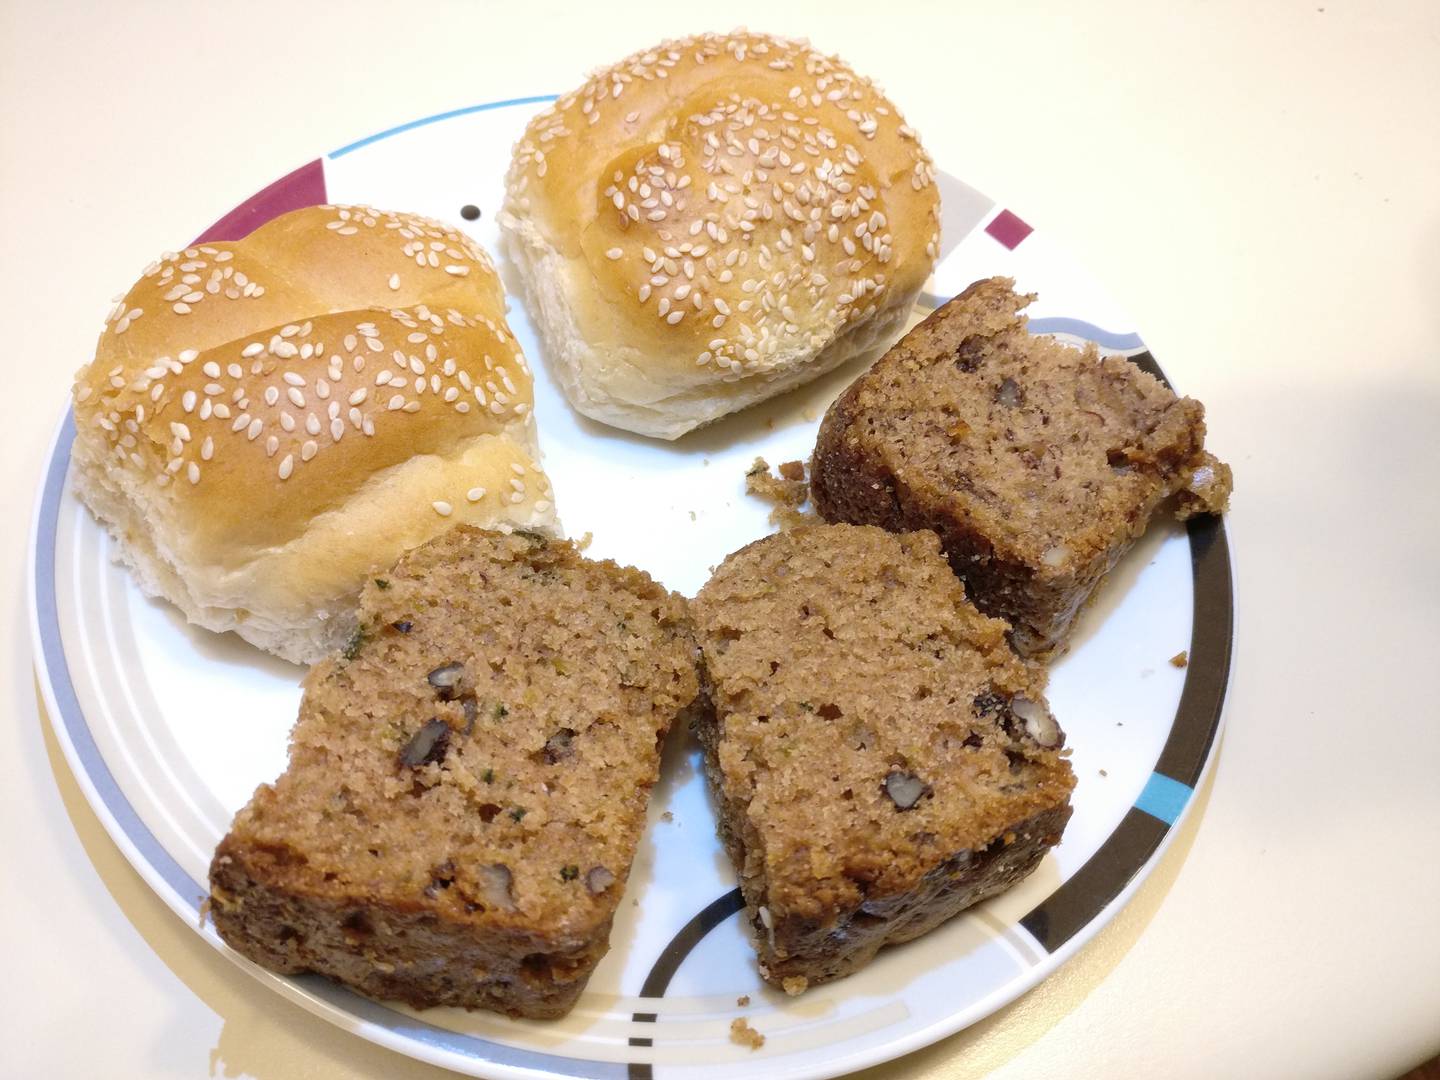 Sesame seed rolls and fresh-baked nut bread at Harner's Bakery & Restaurant in North Aurora.